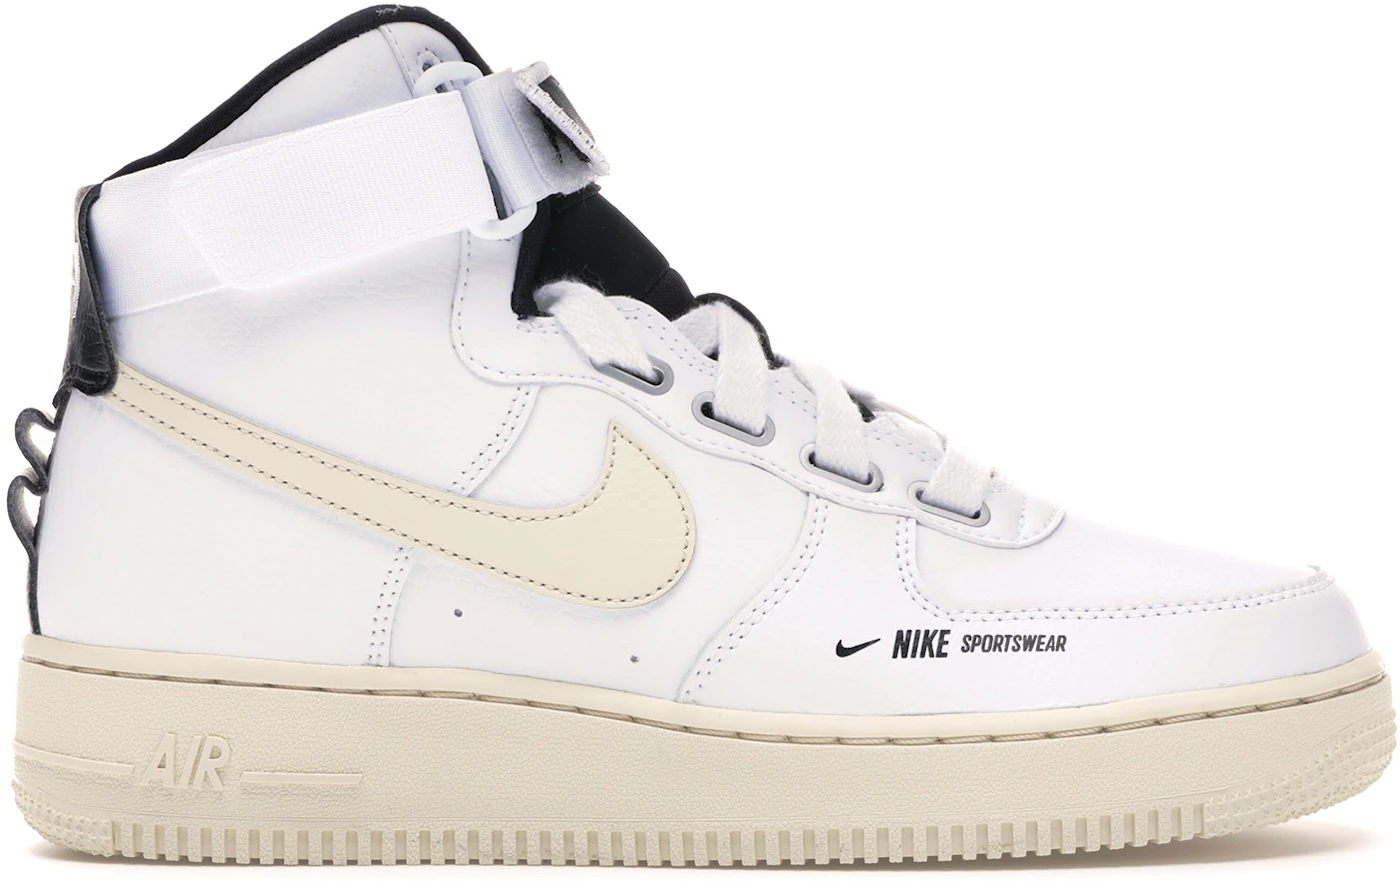 Nike's Air Force 1 High Utility Particle Beige